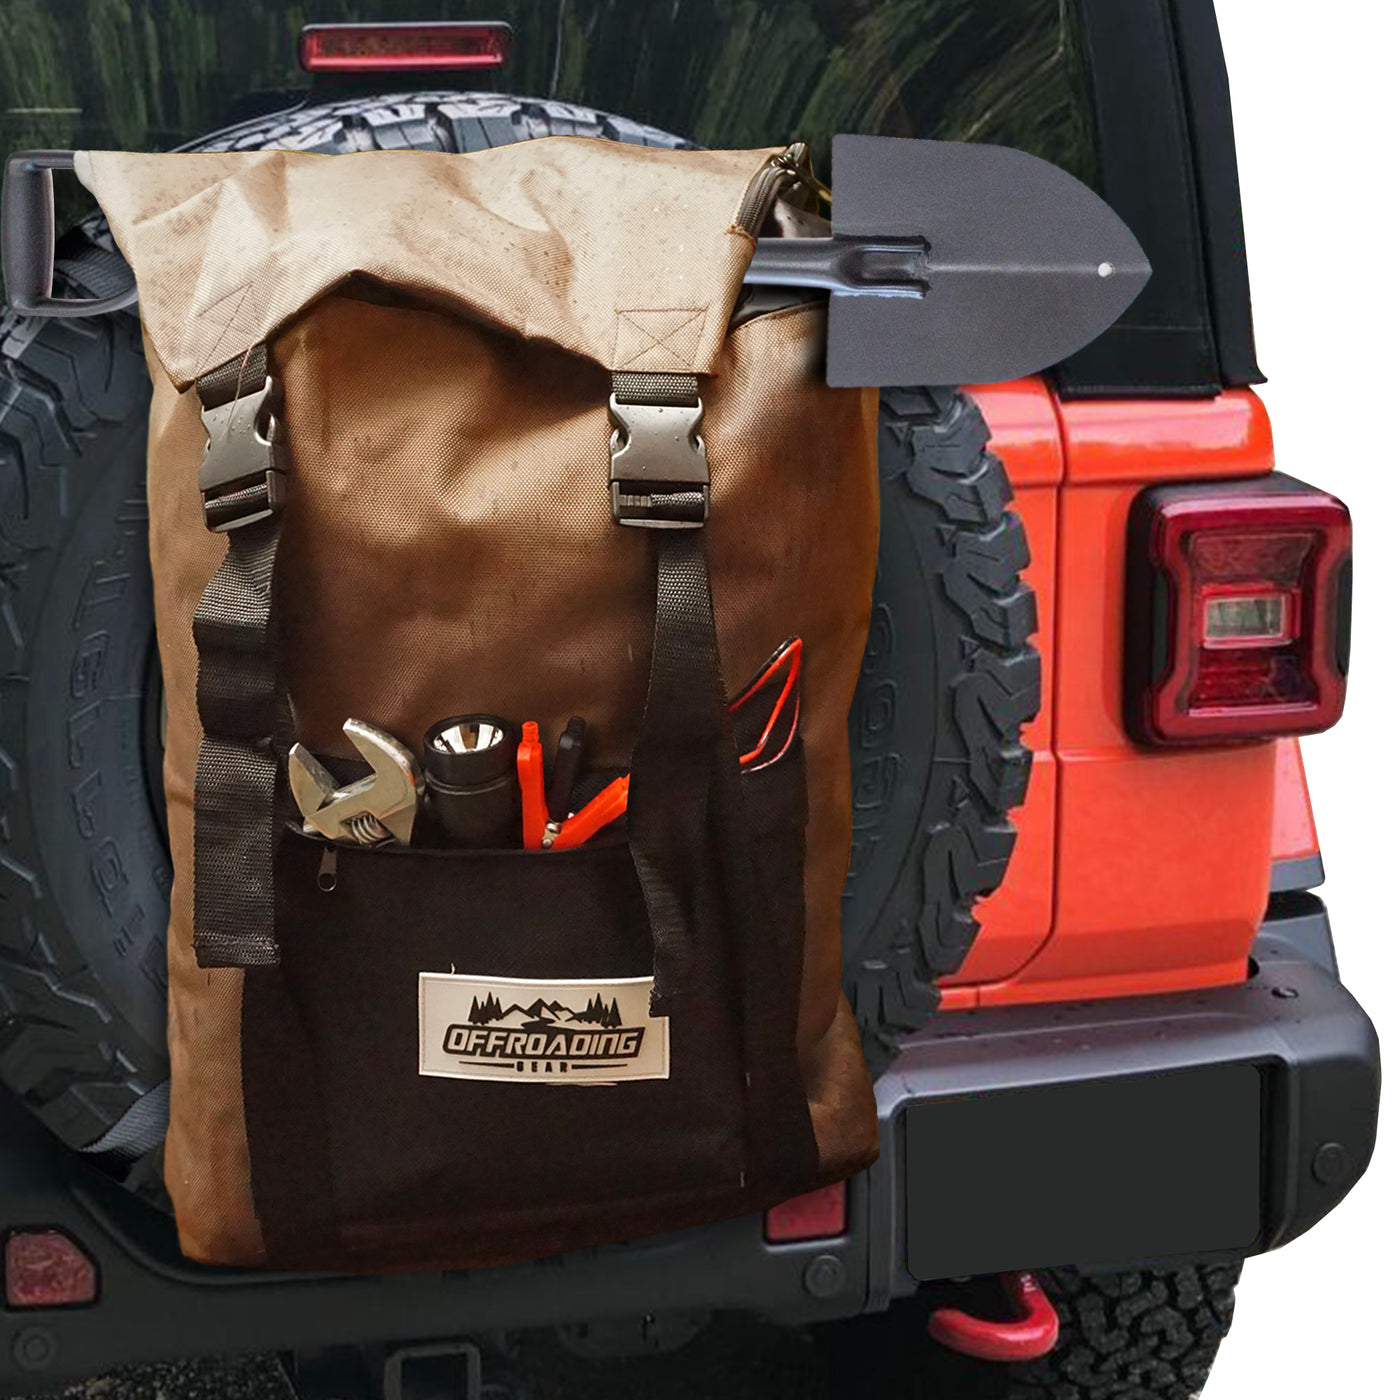 Spare Tire Trash and Rear Gear Bag w/Seat Organizer & Backpack | Off-road Accessory For Jeep/SUV/RV/Overland…